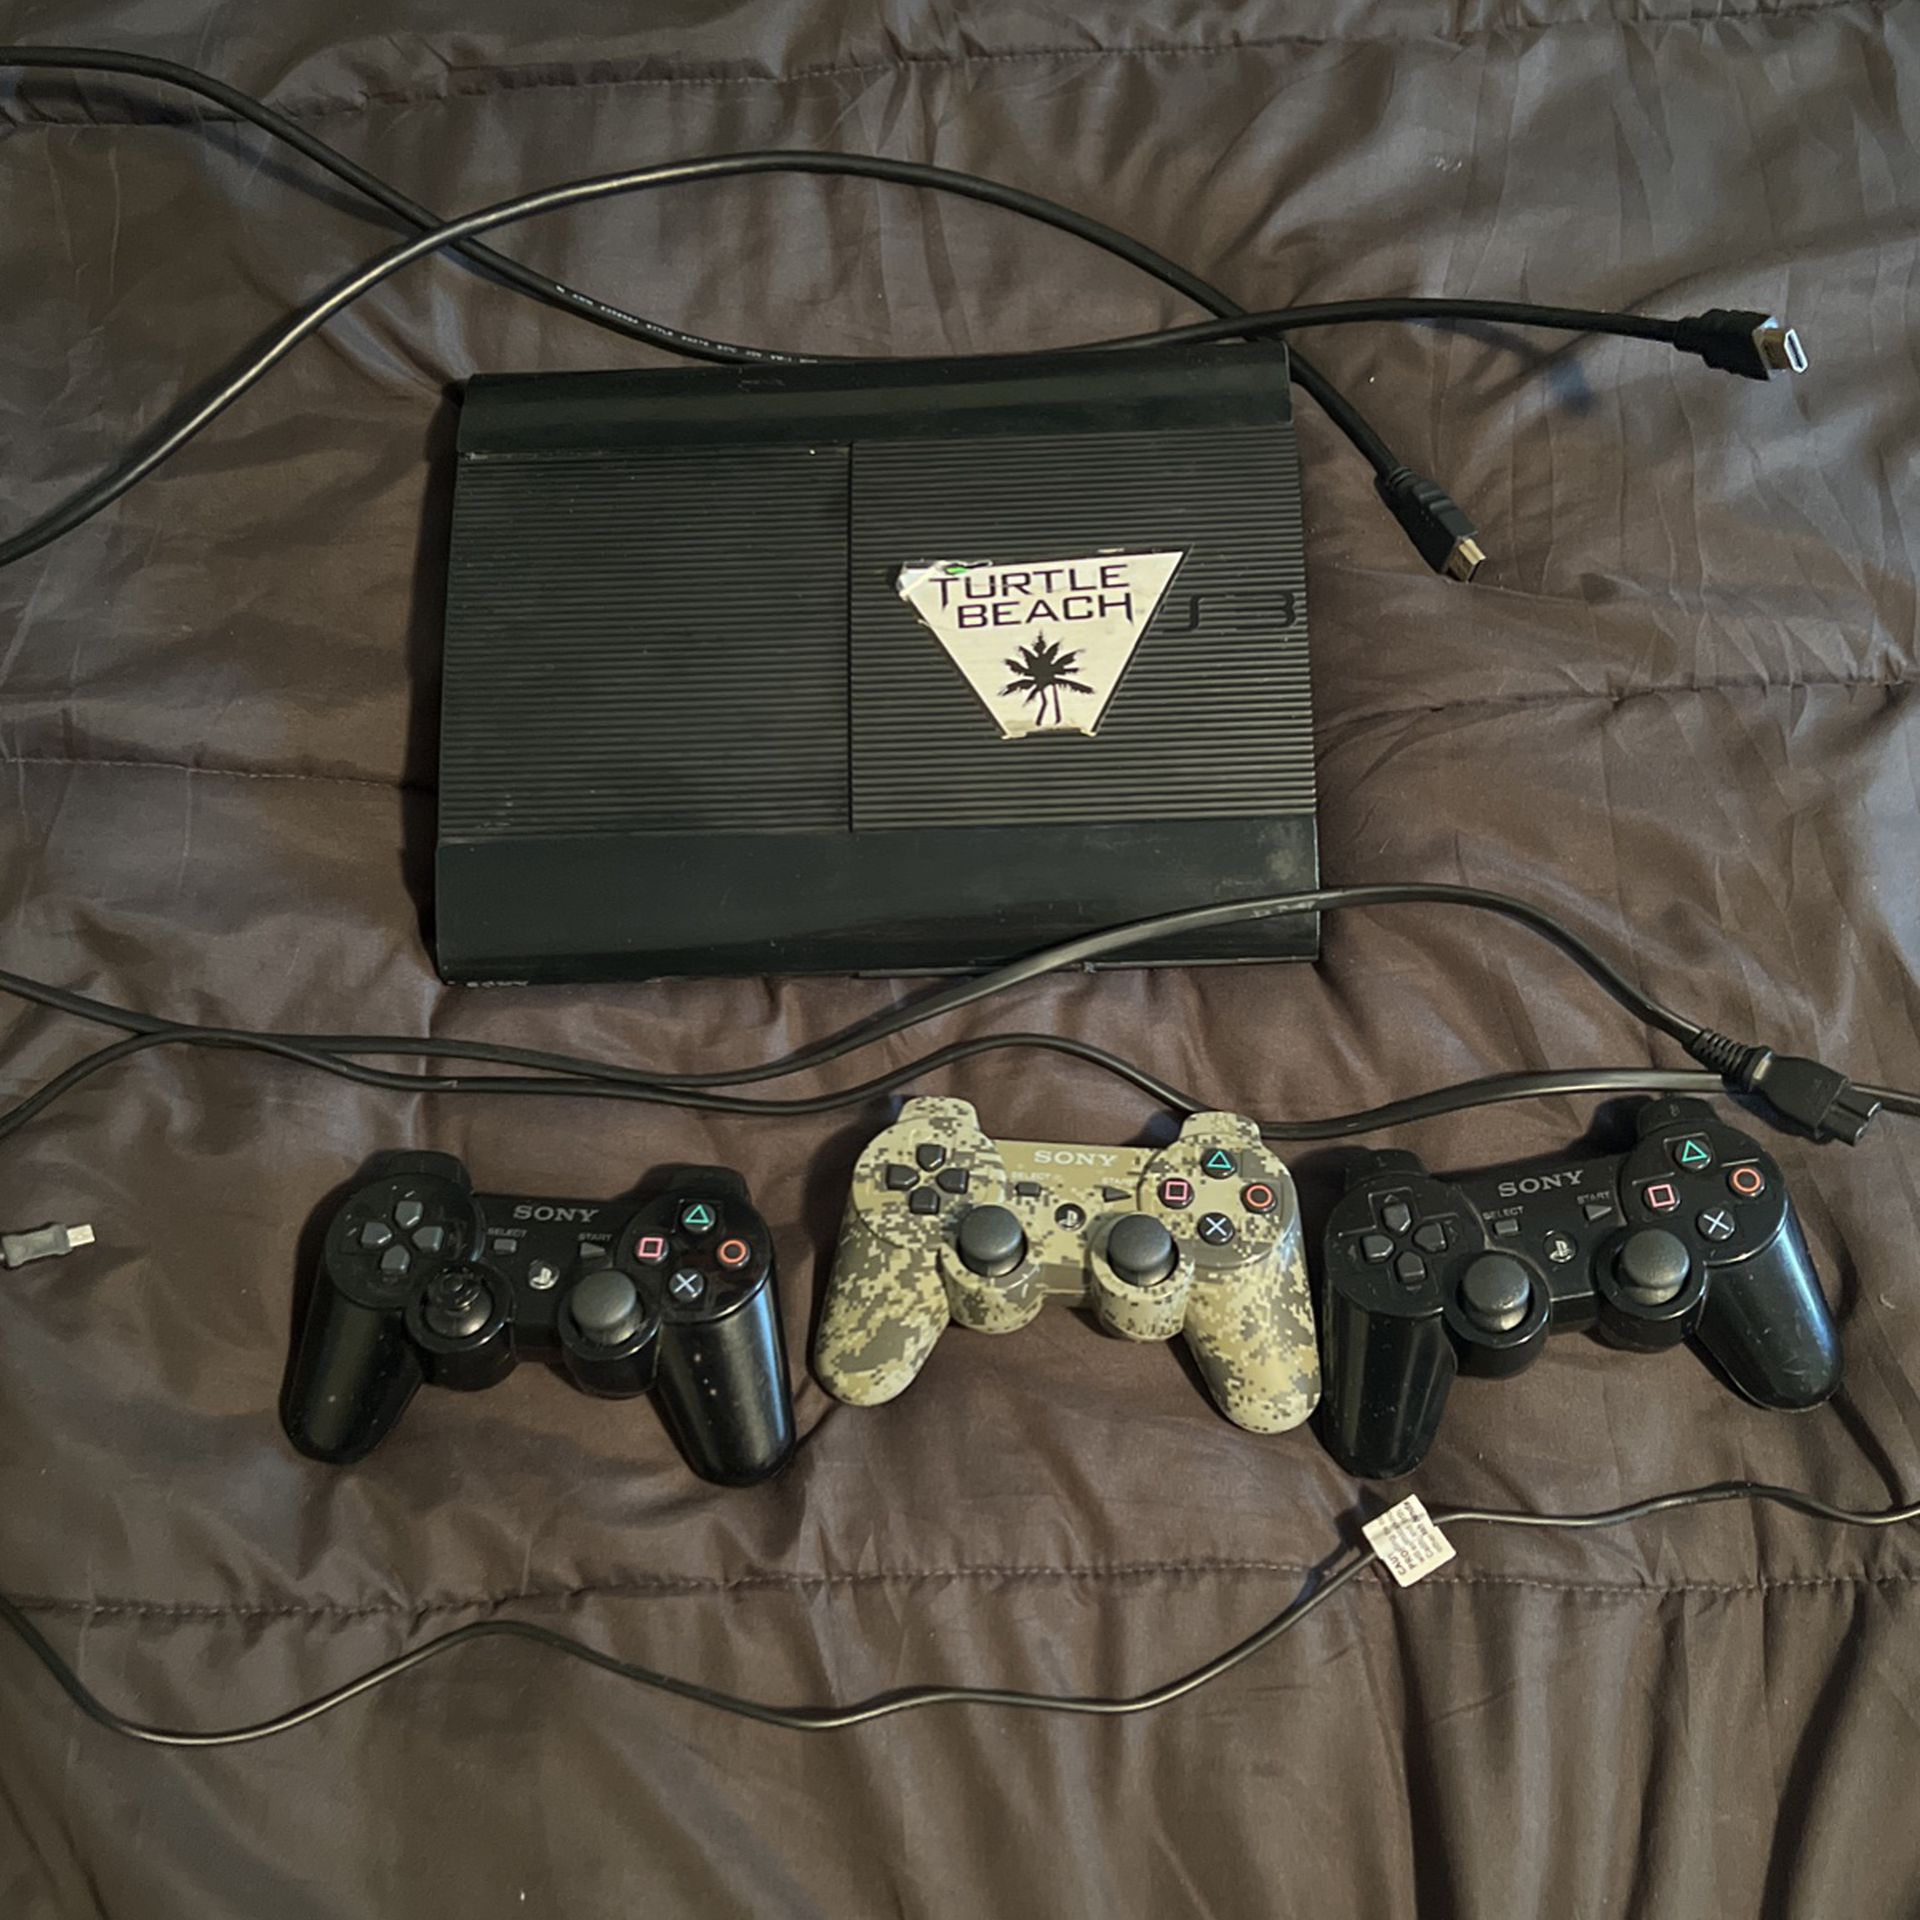 PS3 with 3 controlers, HDMI cable, Power cord and charging cord for controlers 